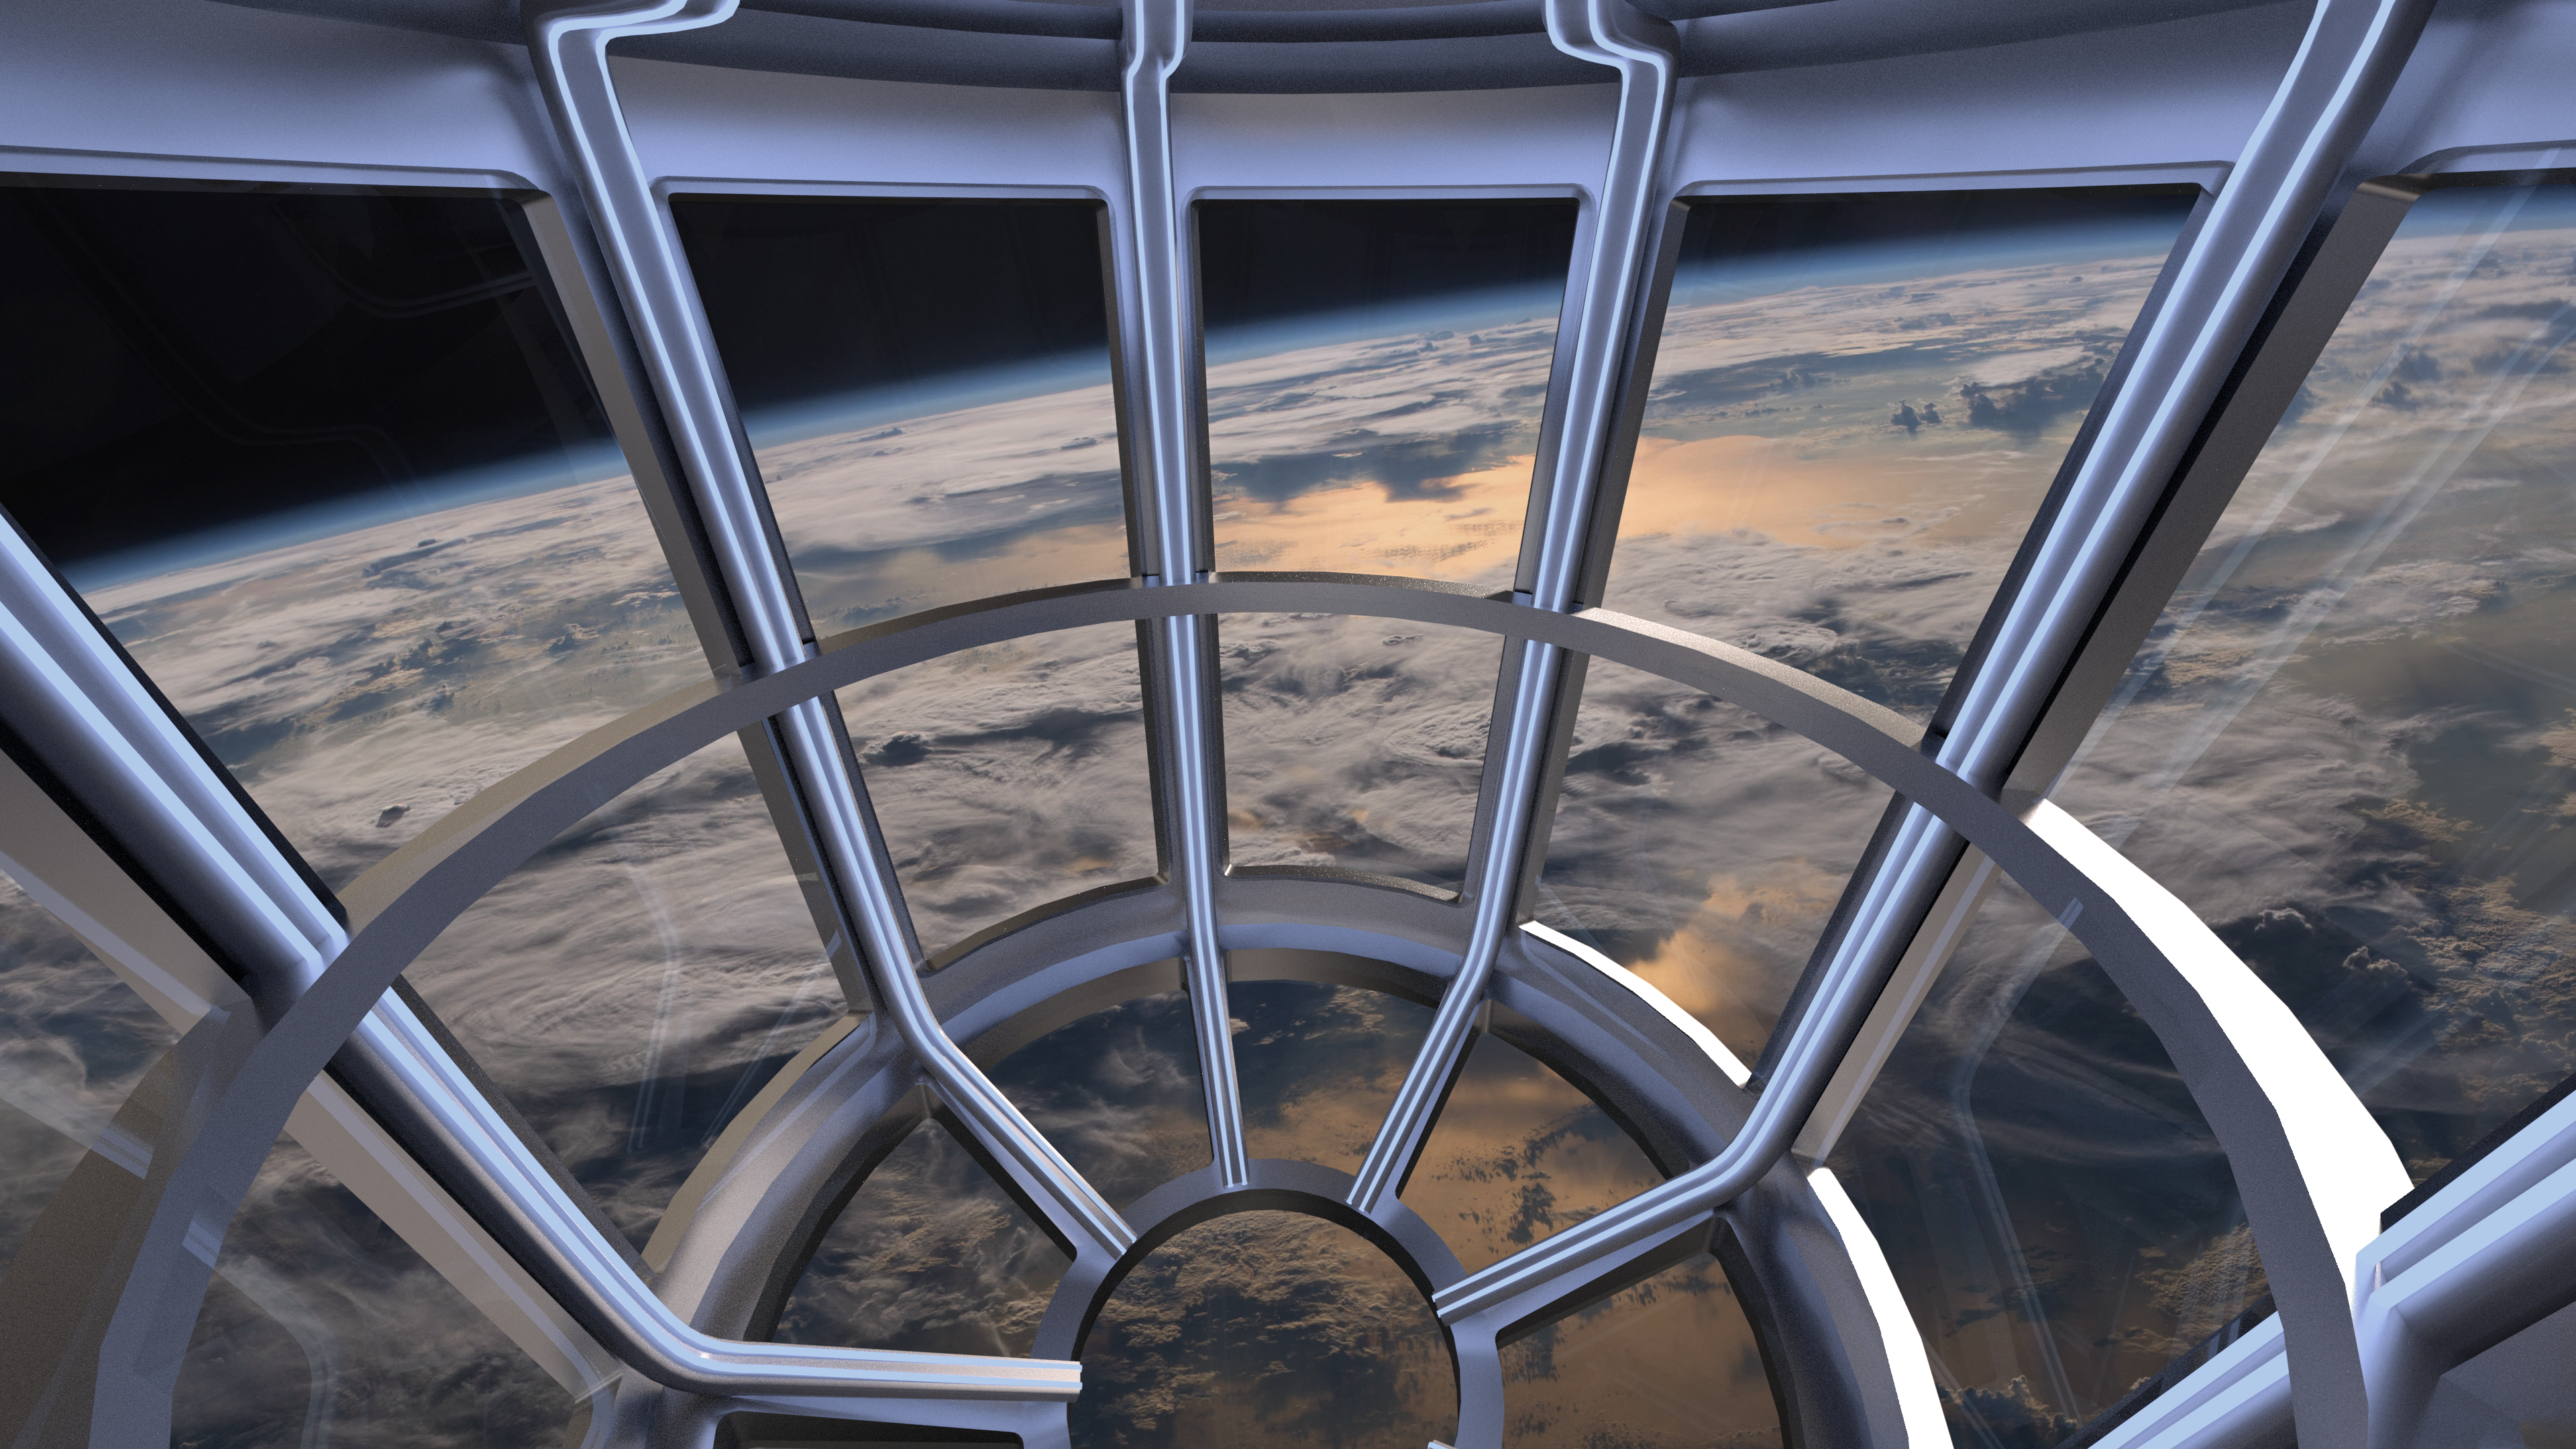 A view toward earth from inside the Axiom Station's Earth Observatory